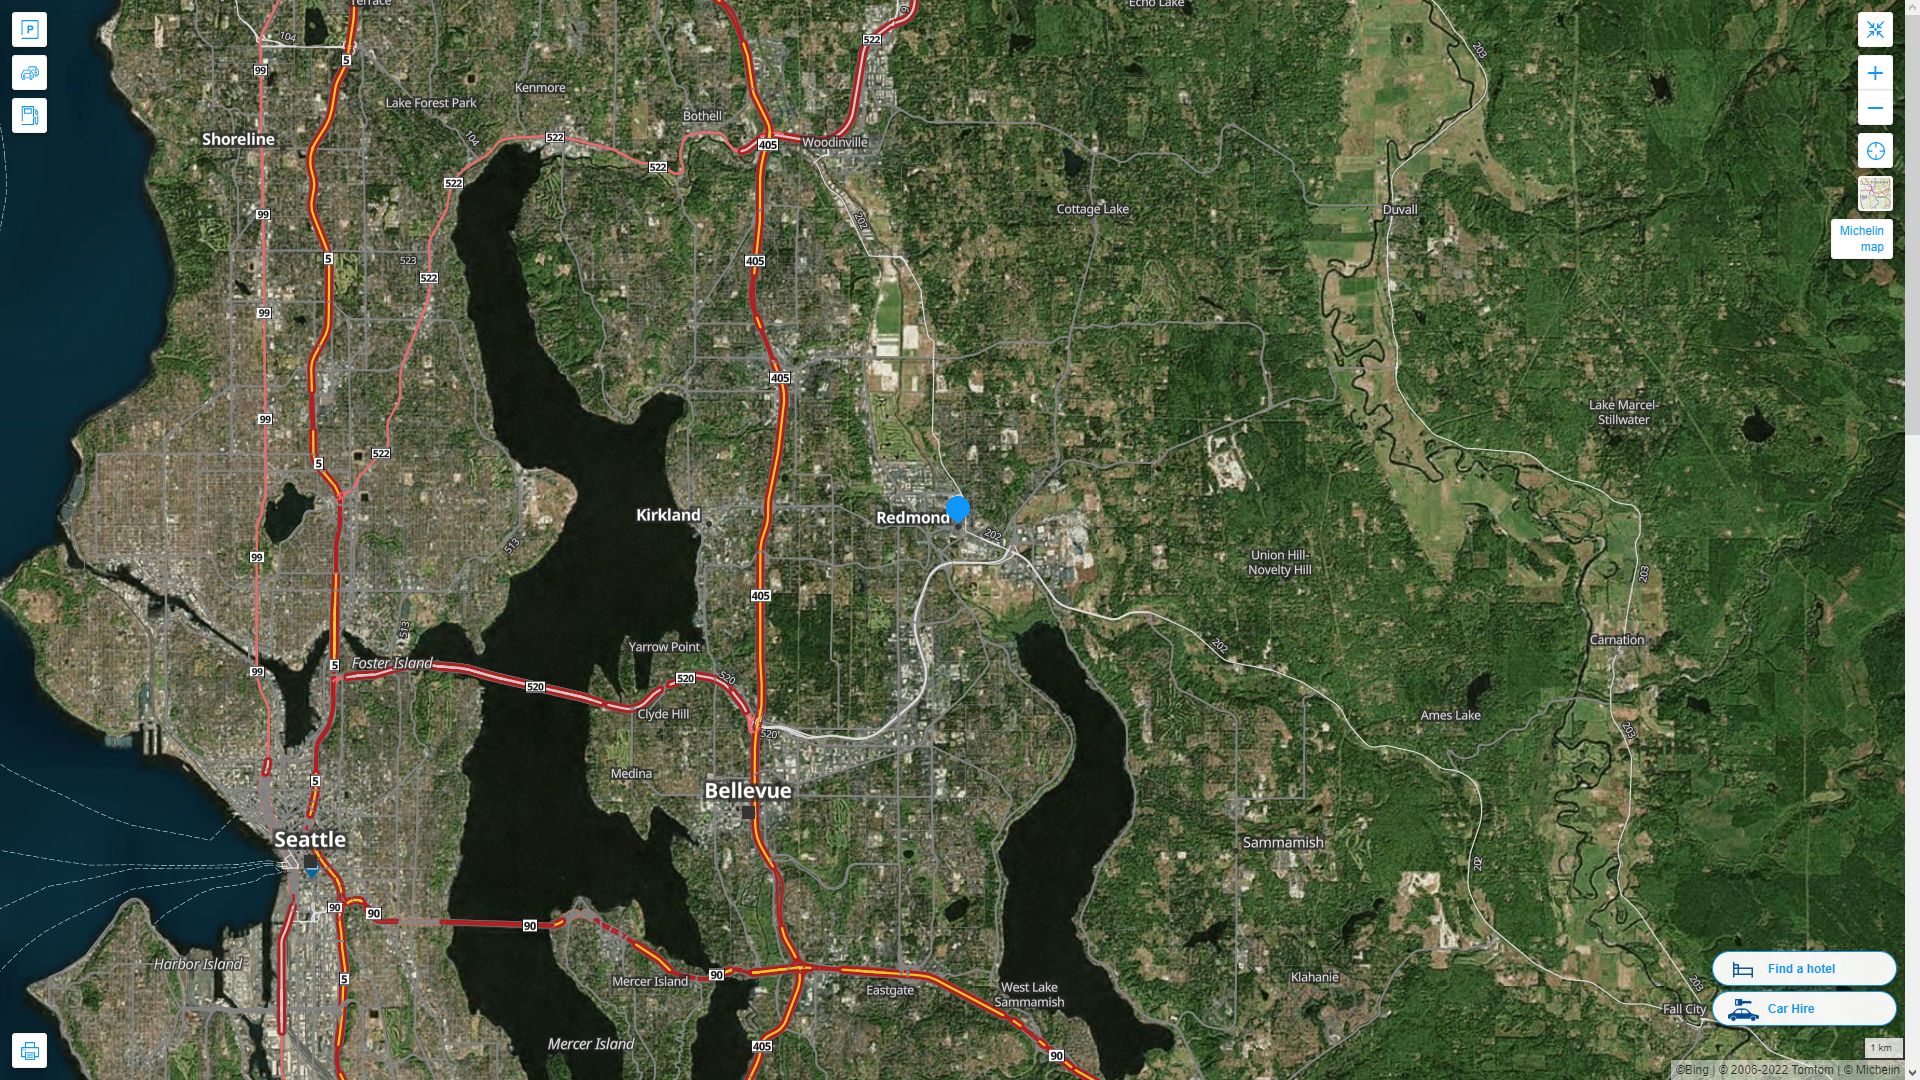 Redmond Washington Highway and Road Map with Satellite View